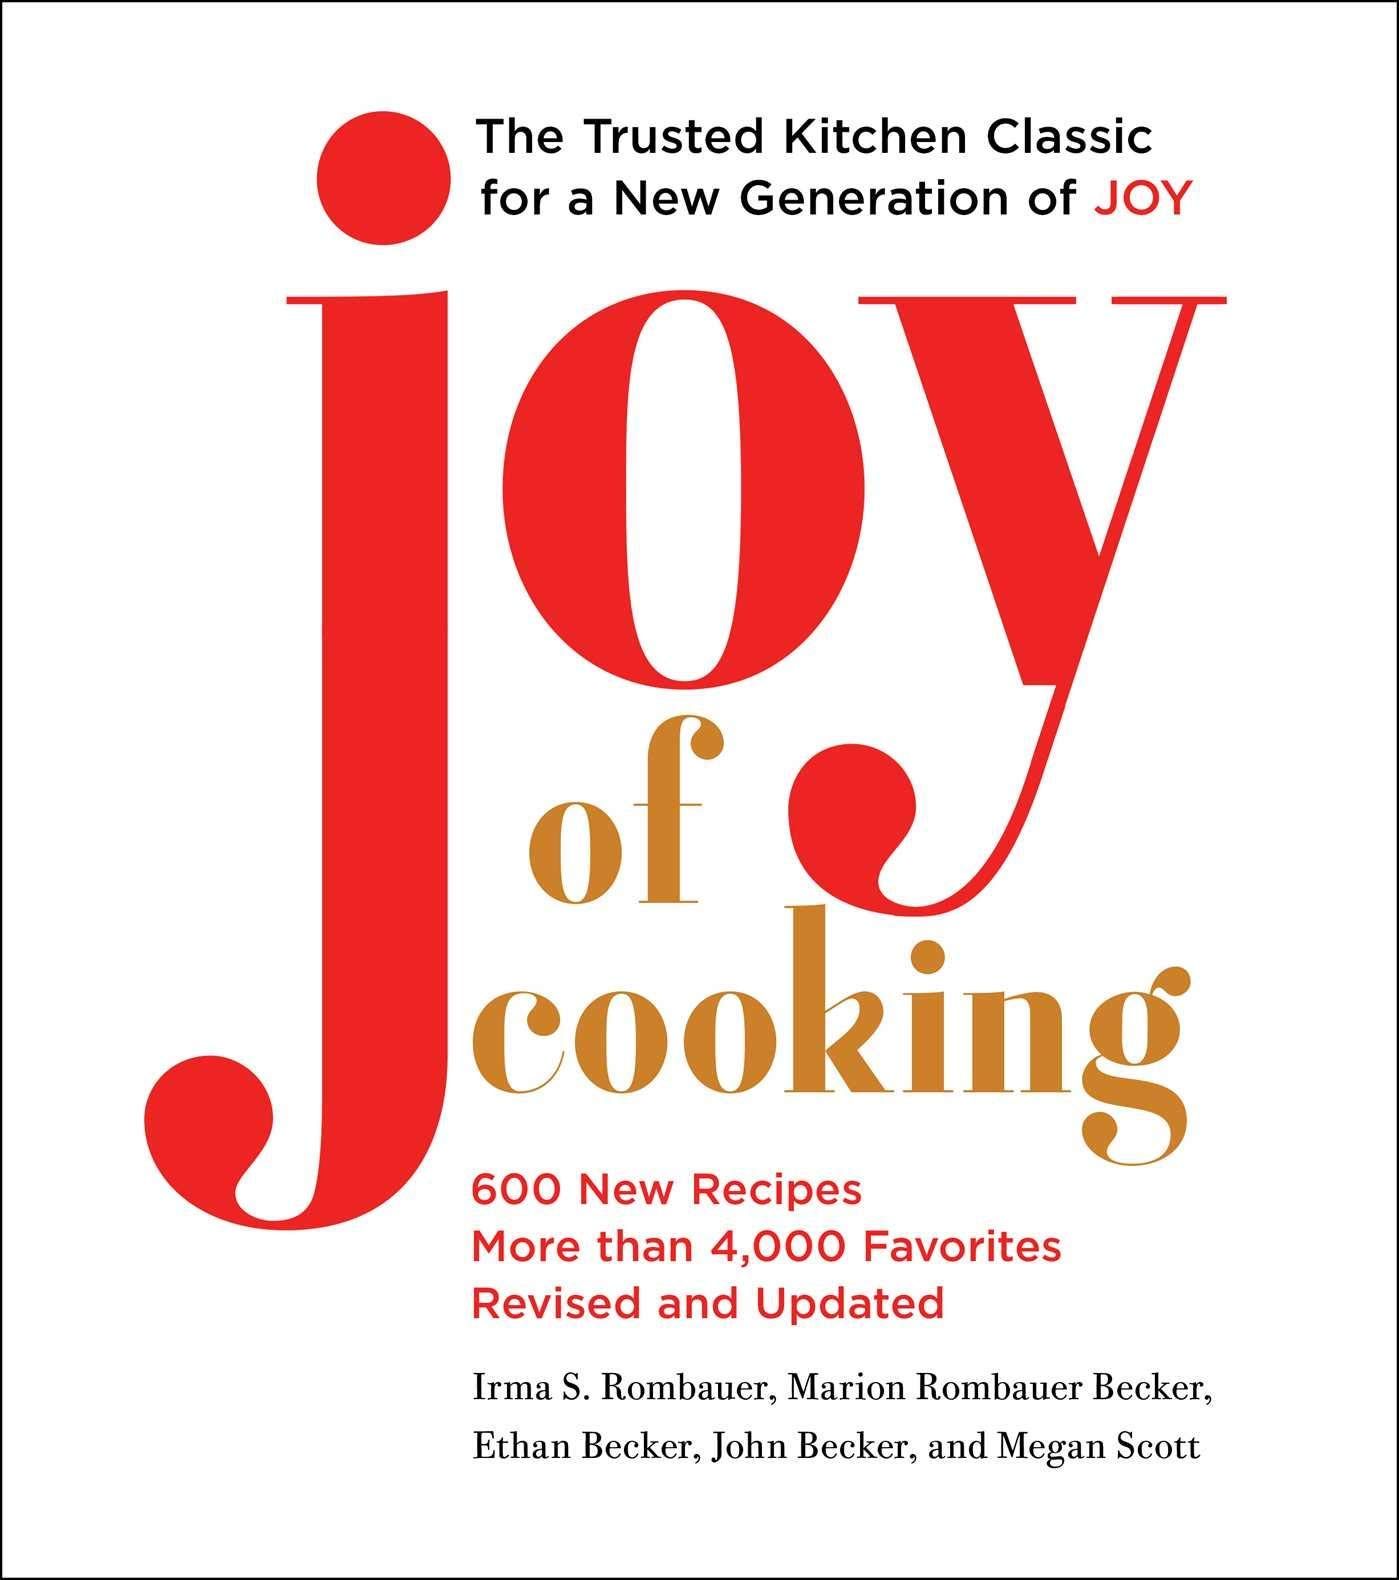 Looking for a Back-to-Basics Cookbook? Our Community Recommends These 5.